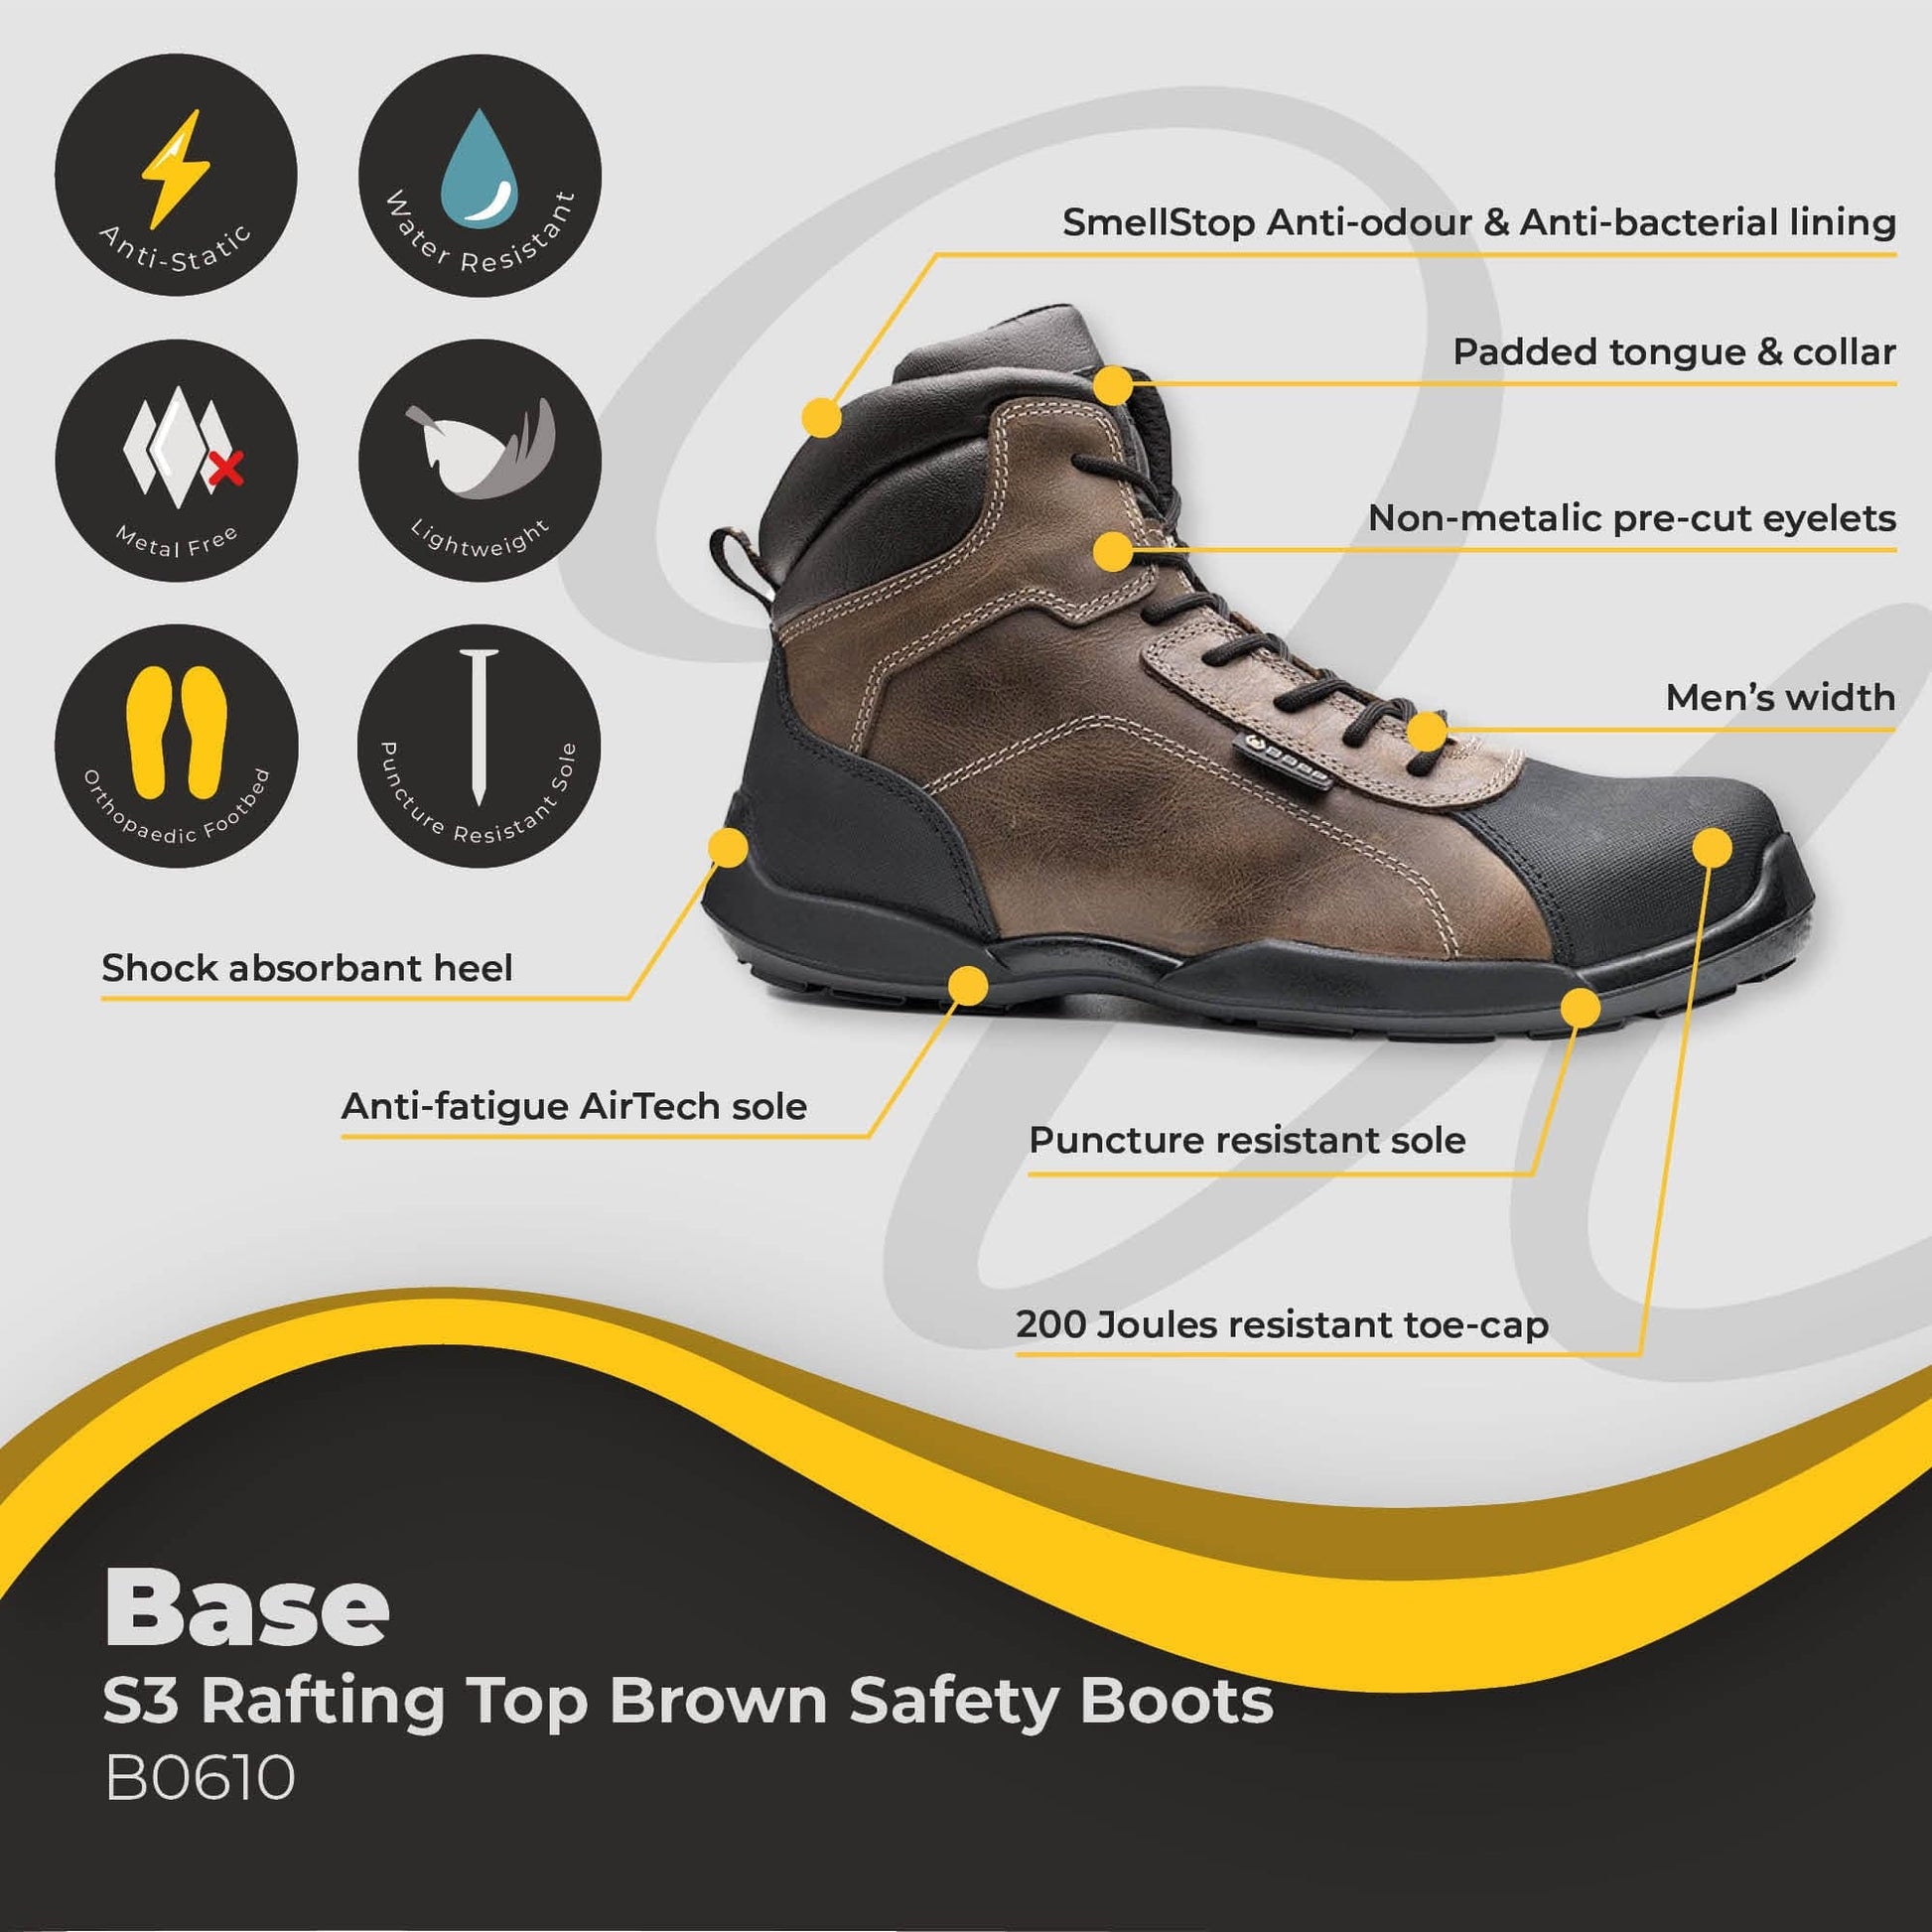 base rafting top s3 brown safety boots b0610 di610 br 06